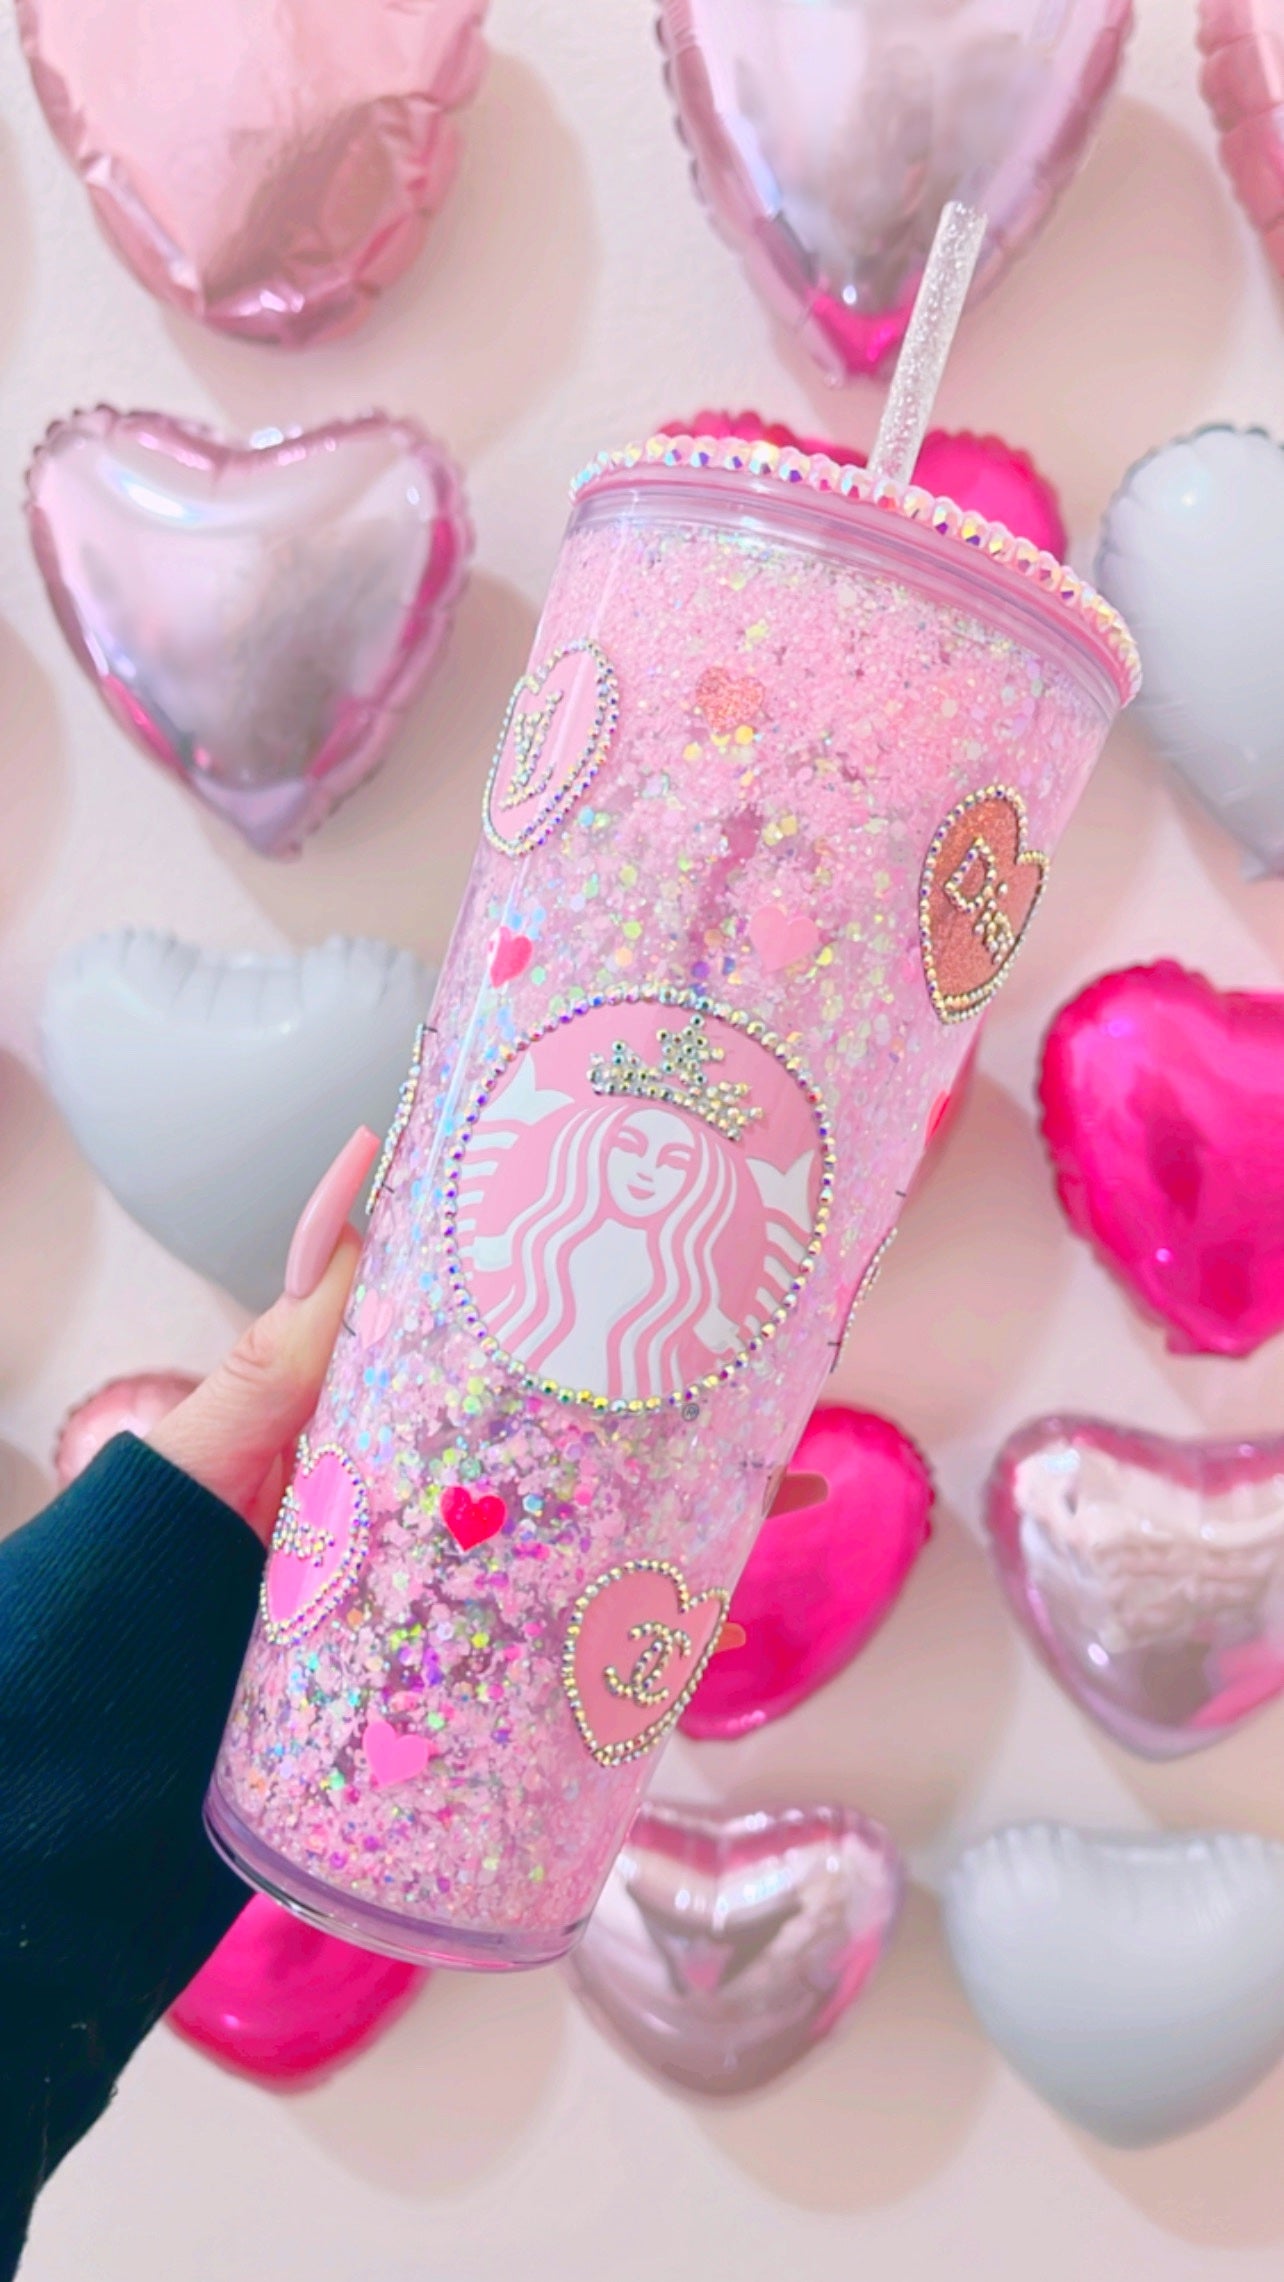 Red Hearts on Pink Tumbler